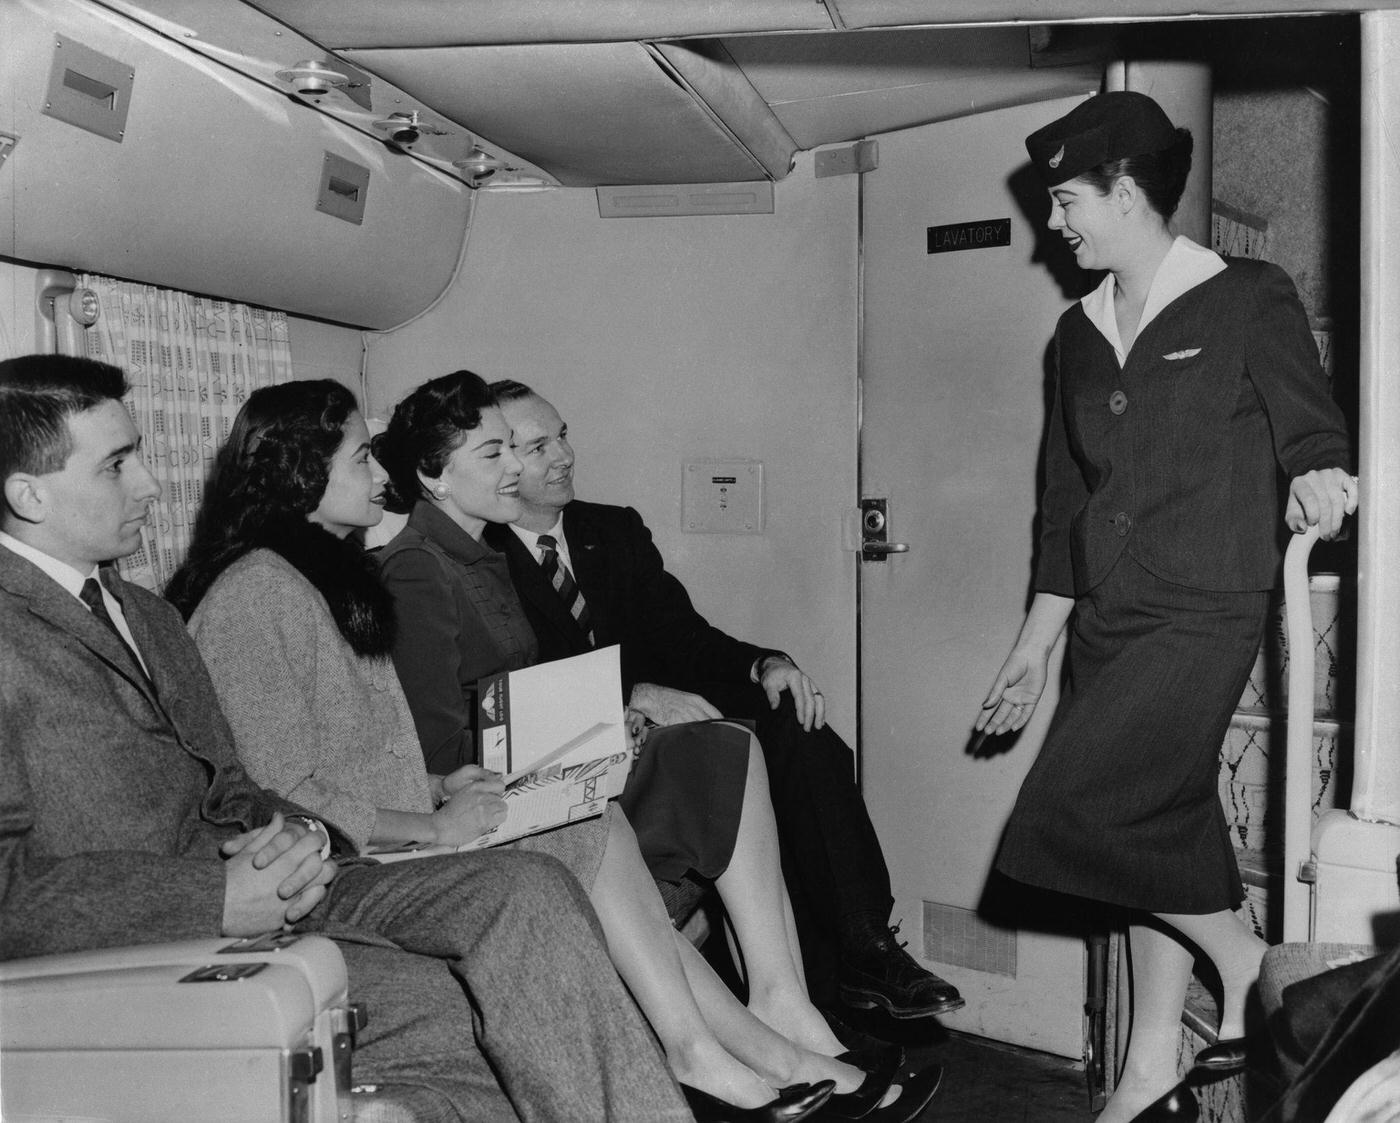 During a flight on a Transocean Air Lines Boeing 377 Stratocruiser in the mid 1950s, an air hostess takes time to chat with passengers and ensure their comfort during the flight.